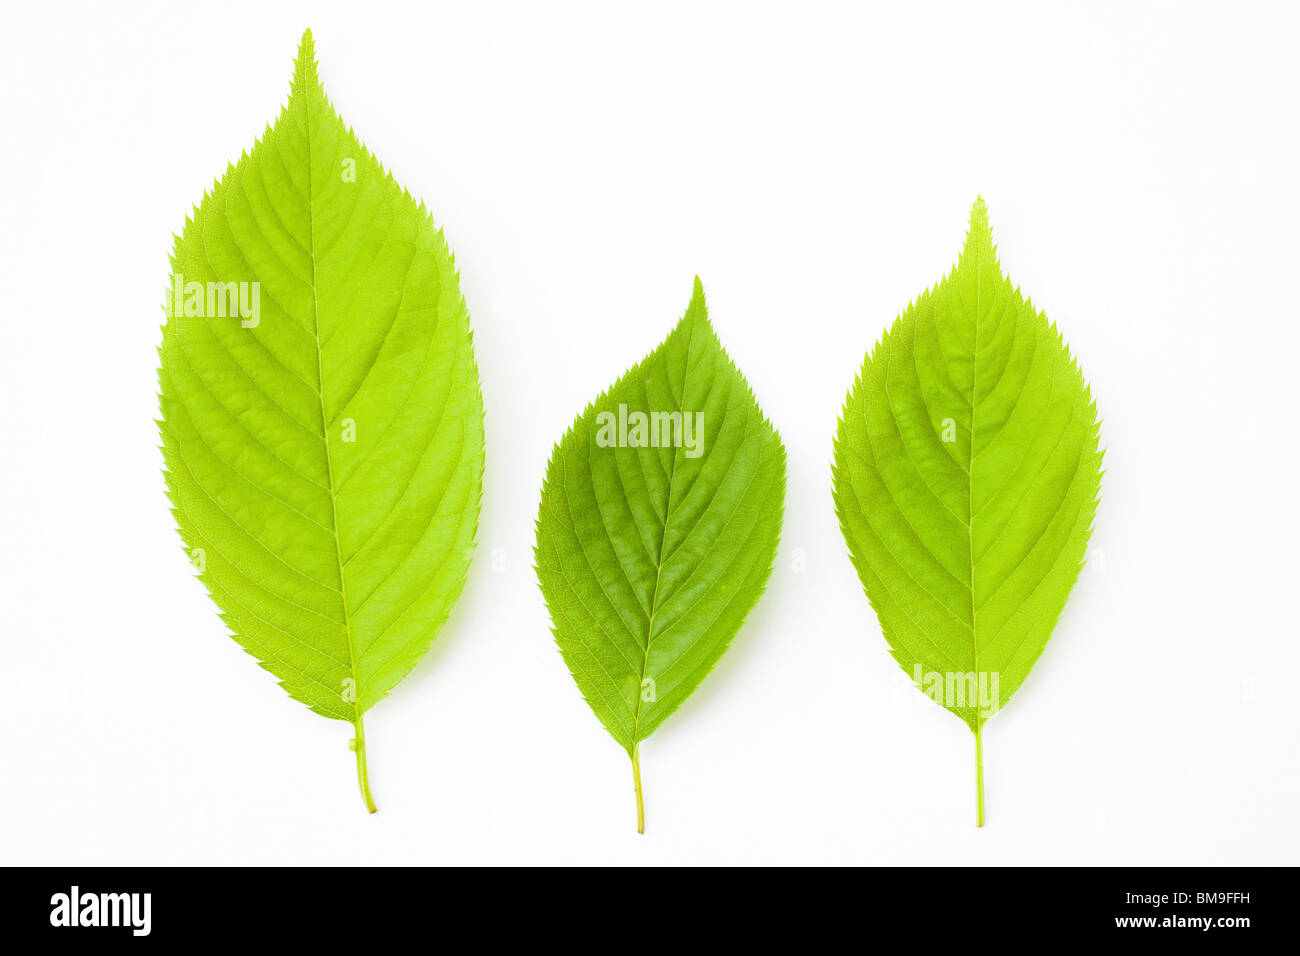 Three green leaves on white background, side by side Stock Photo